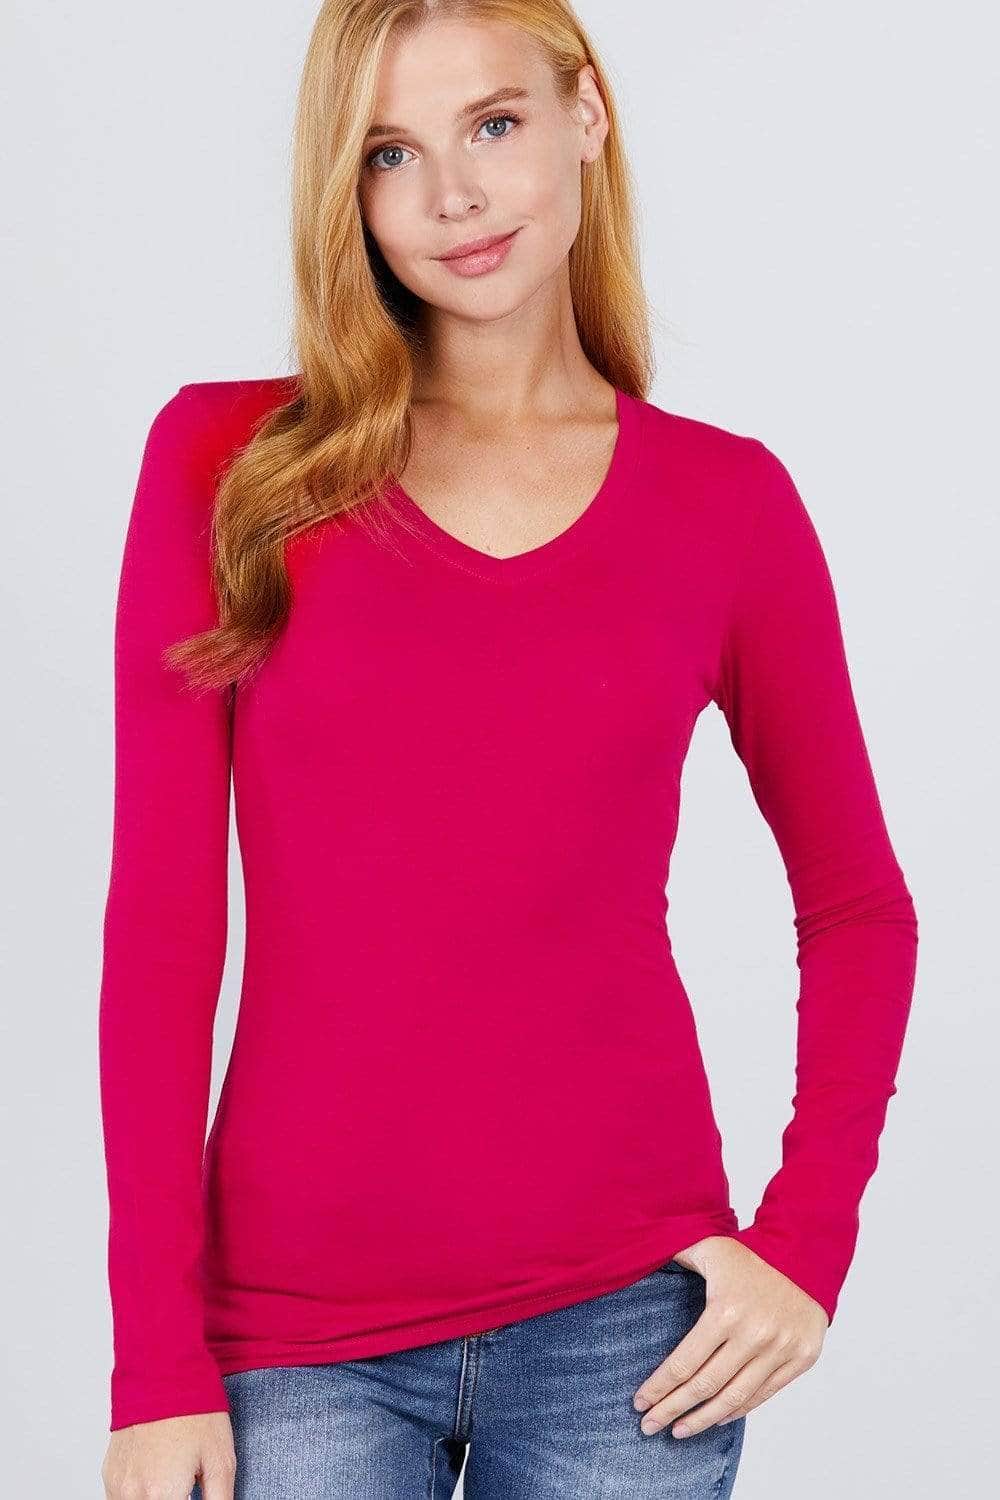 Cotton Jersey V-neck Top-TOPS / DRESSES-[Adult]-[Female]-Hot Pink-S-Blue Zone Planet